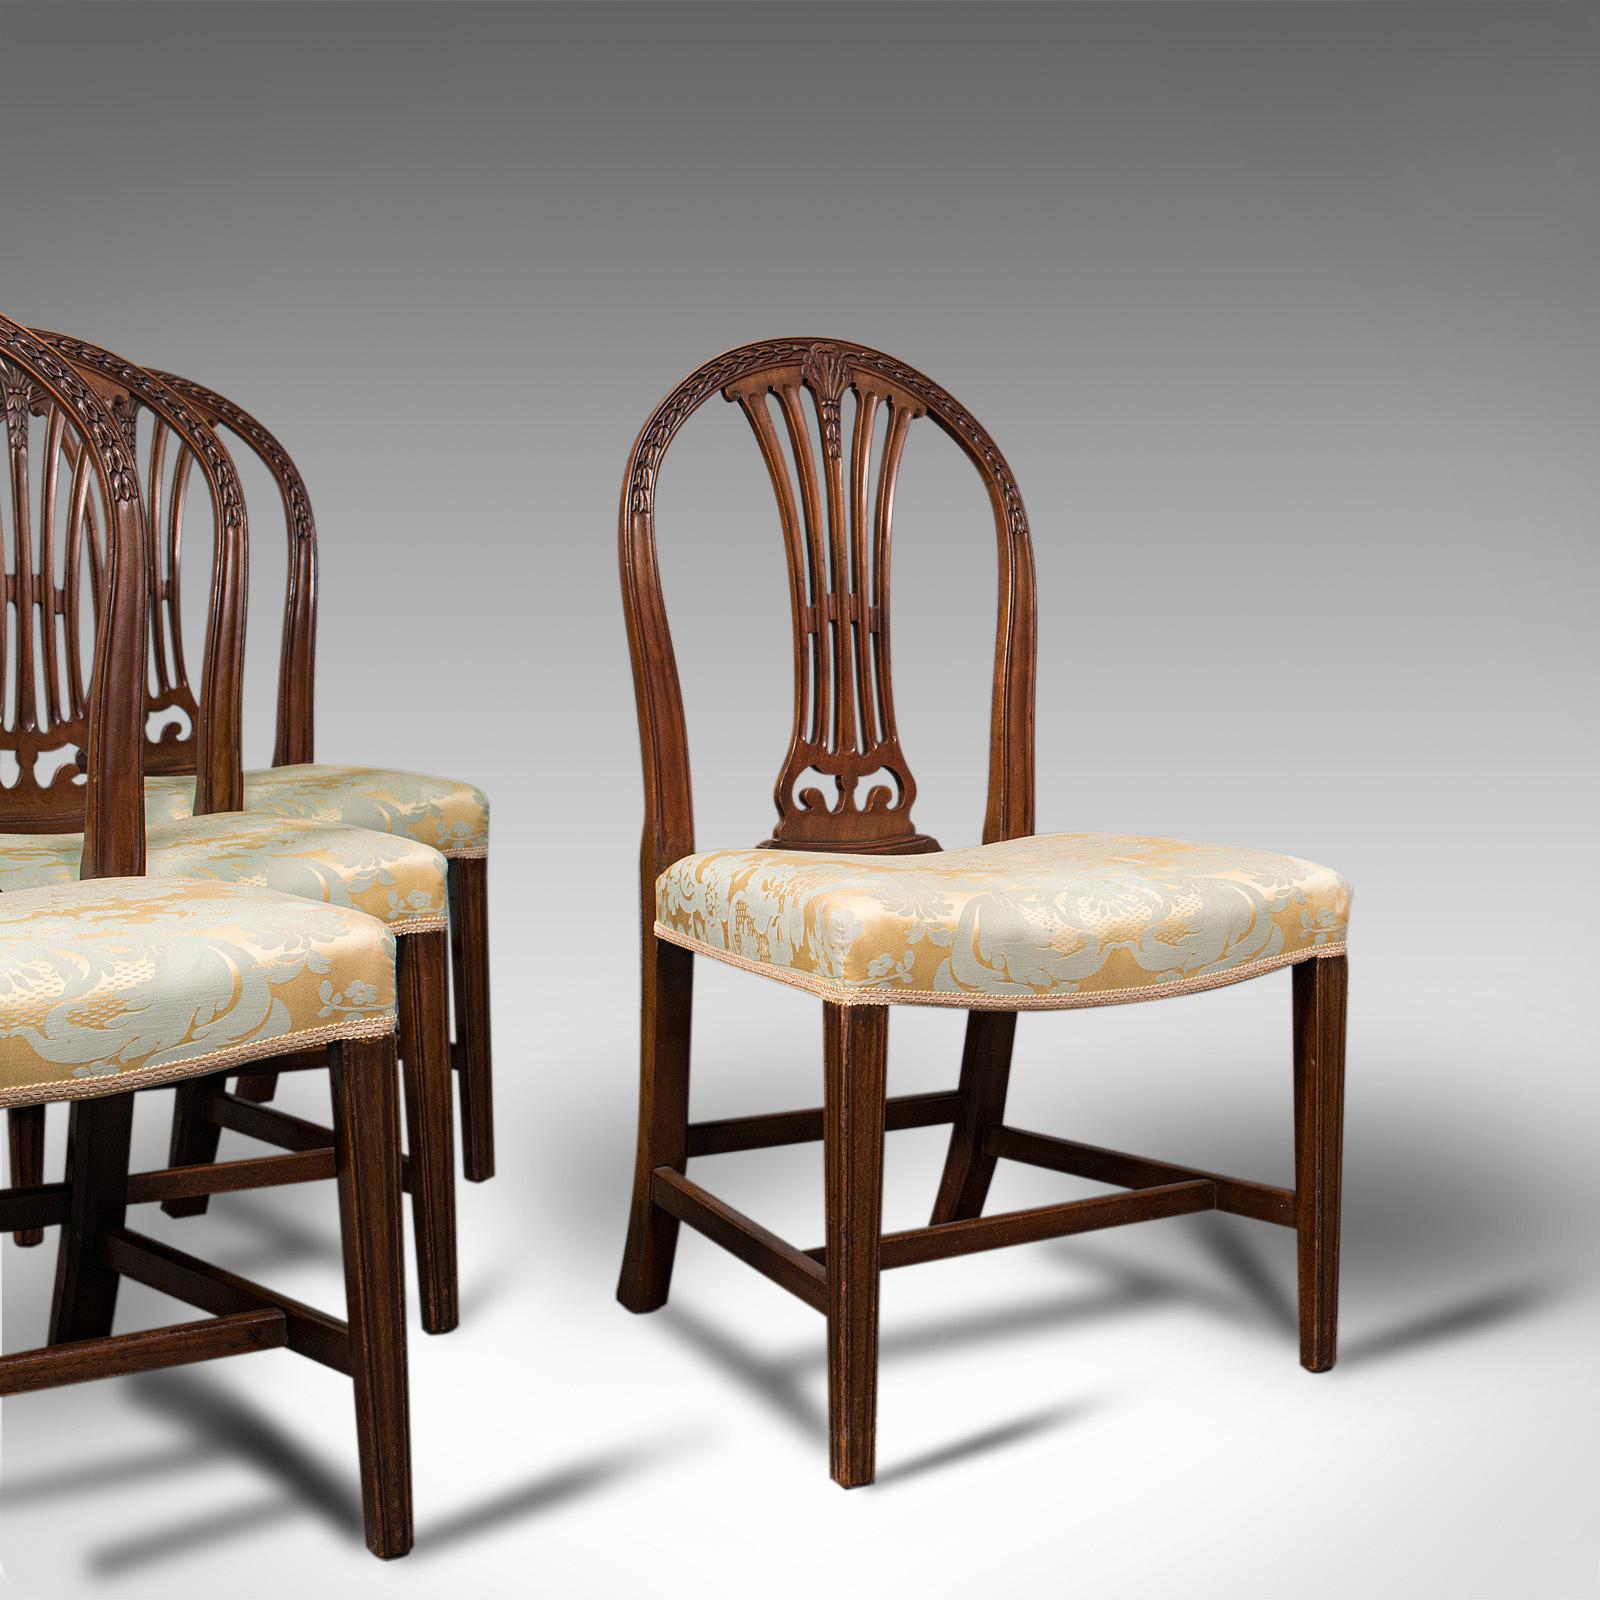 This is a set of 4 Hepplewhite revival chairs. An English, mahogany dining suite, dating to the late Victorian period, circa 1890.

Delightfully graceful frames and attractive upholstery
Displaying a desirable aged patina
Select mahogany shows